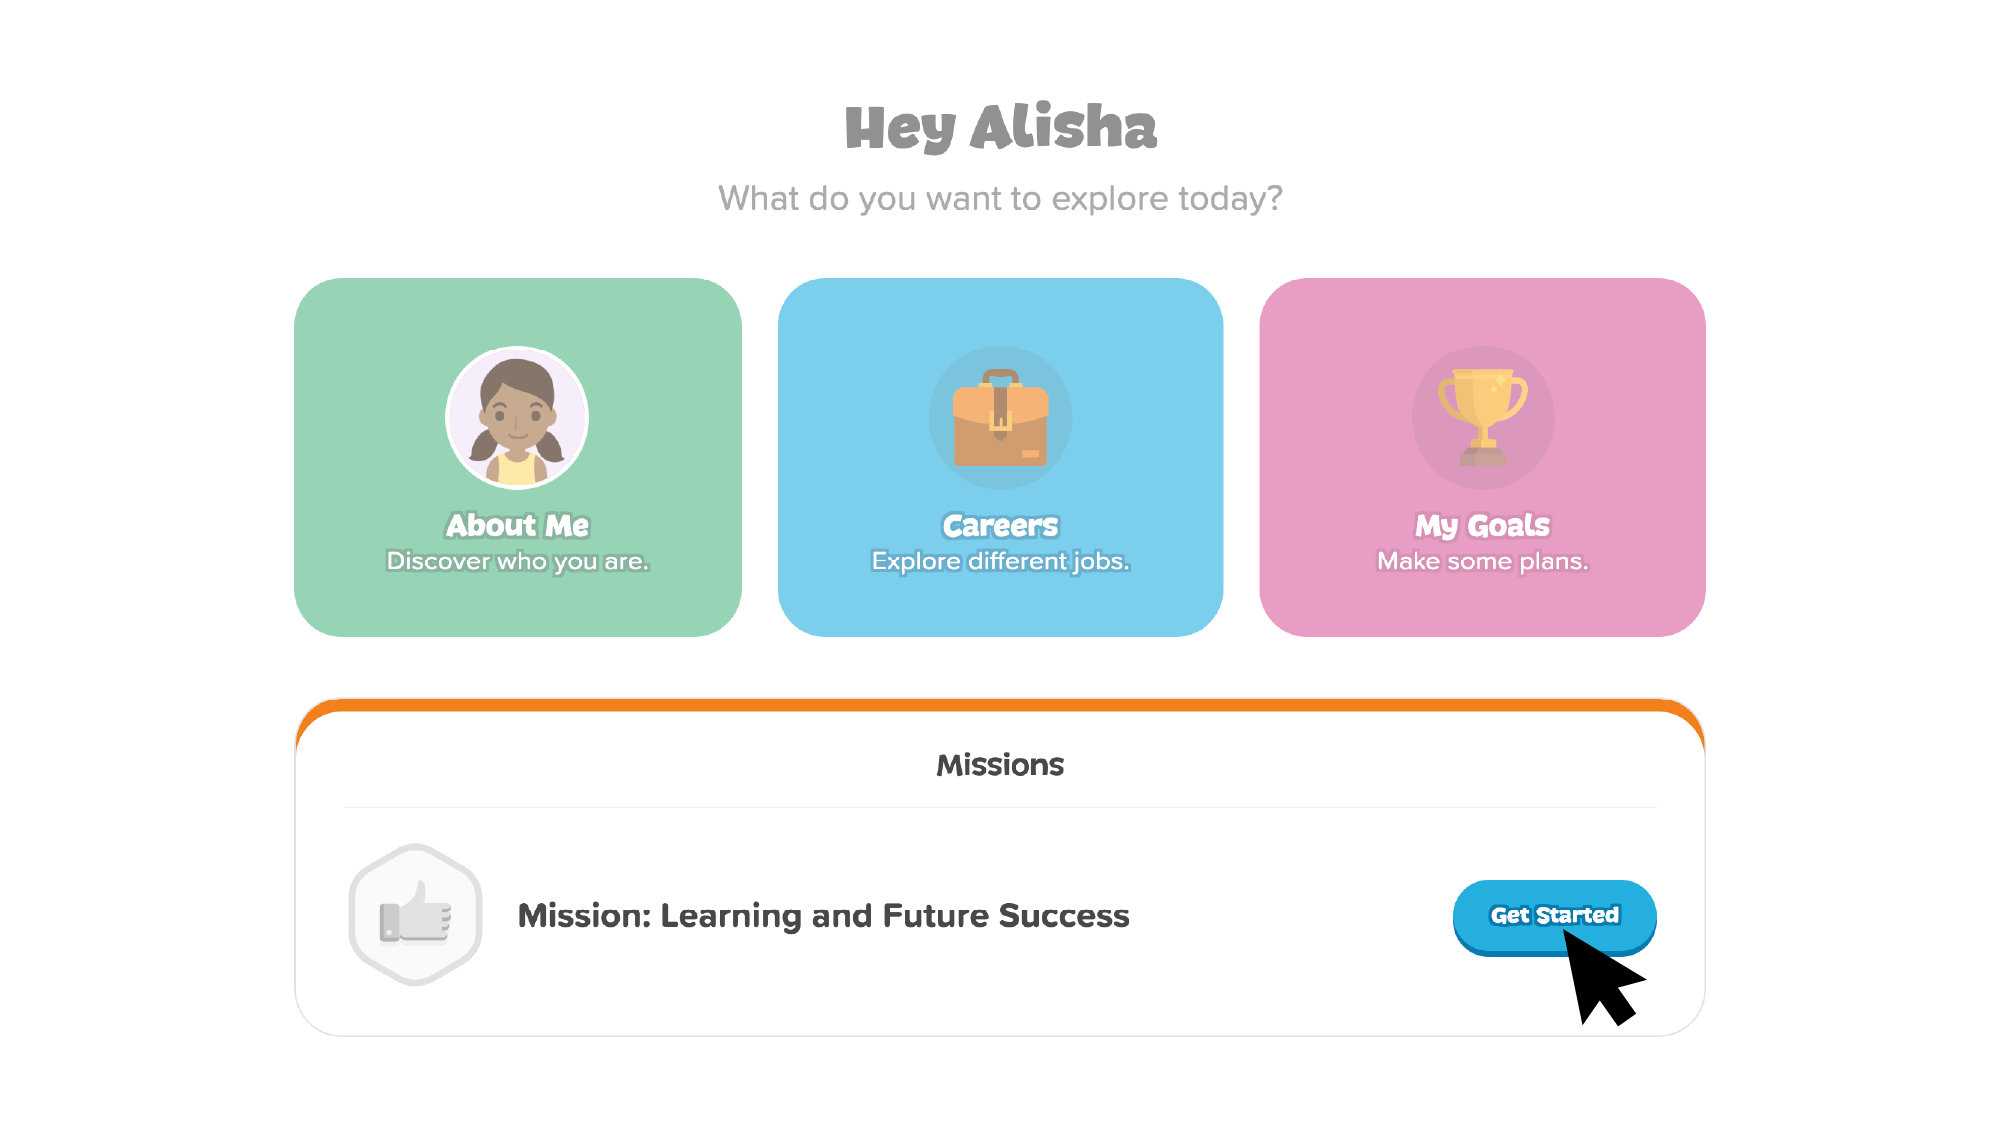 Student dashboard in Xello 3-5. cursor is hovering over the Get Started button to begin a Mission called Learning and Future Success